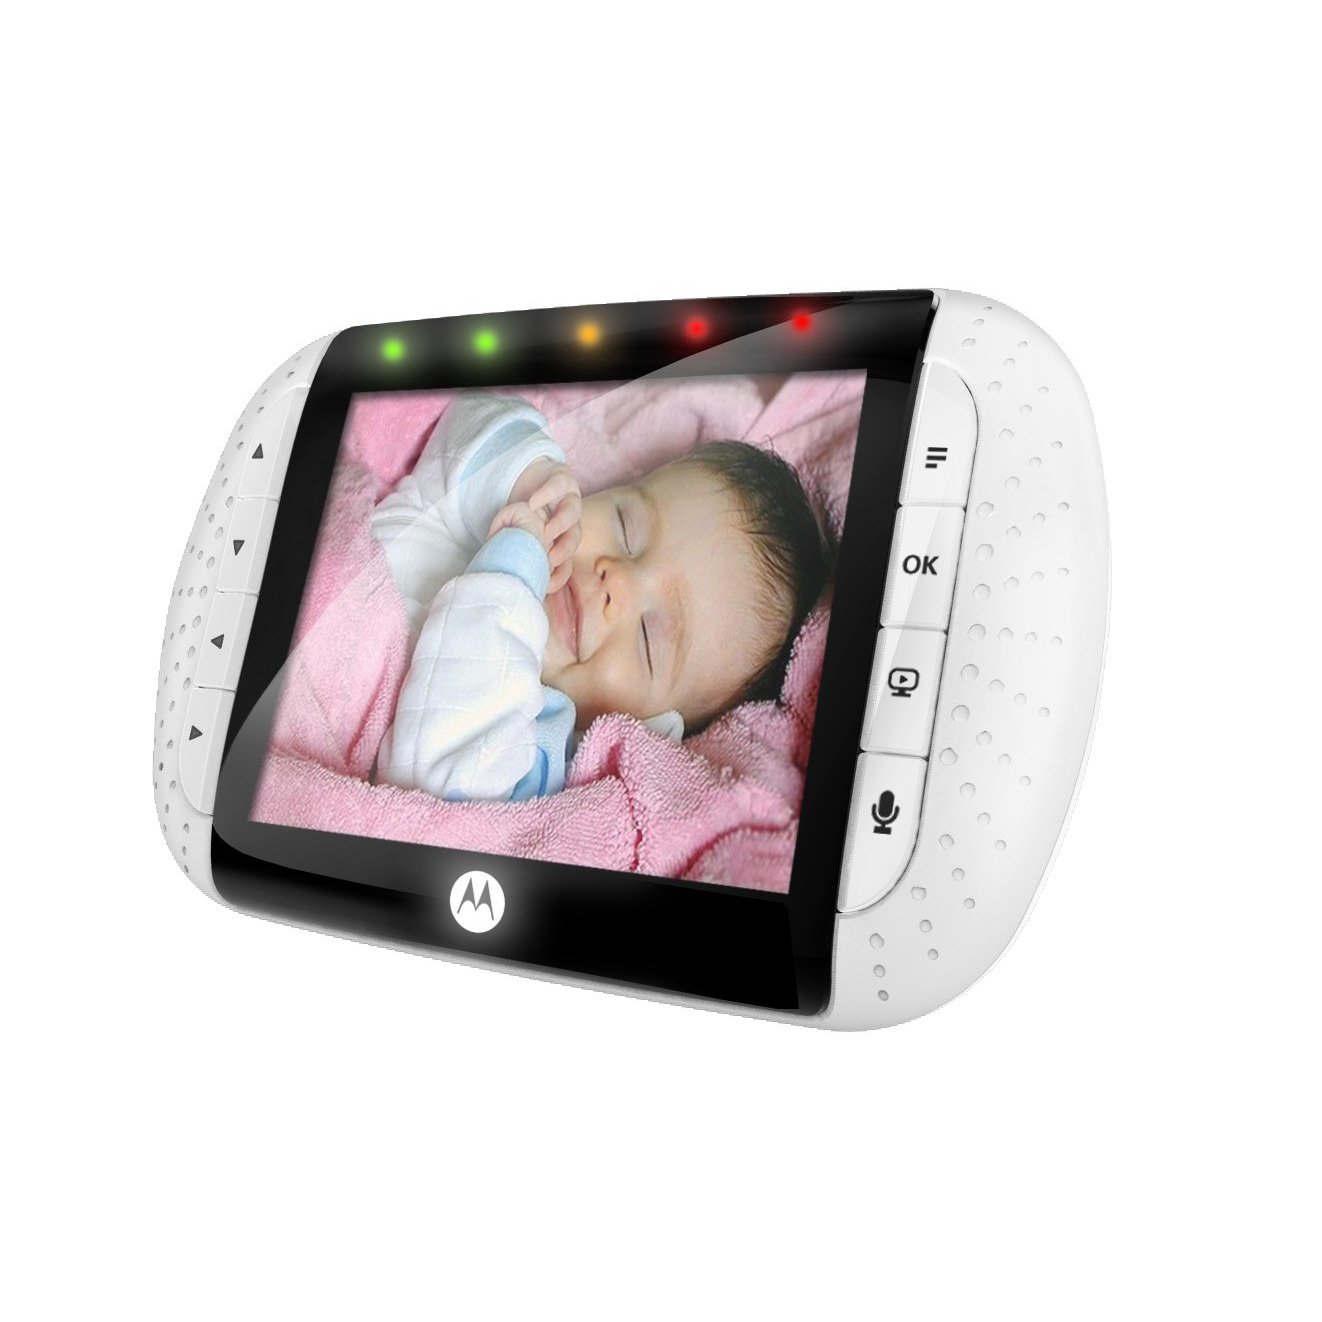 http://thetechjournal.com/wp-content/uploads/images/1110/1318126294-motorola-digital-video-baby-monitor-with-35-inch-color-lcd-screen-4.jpg